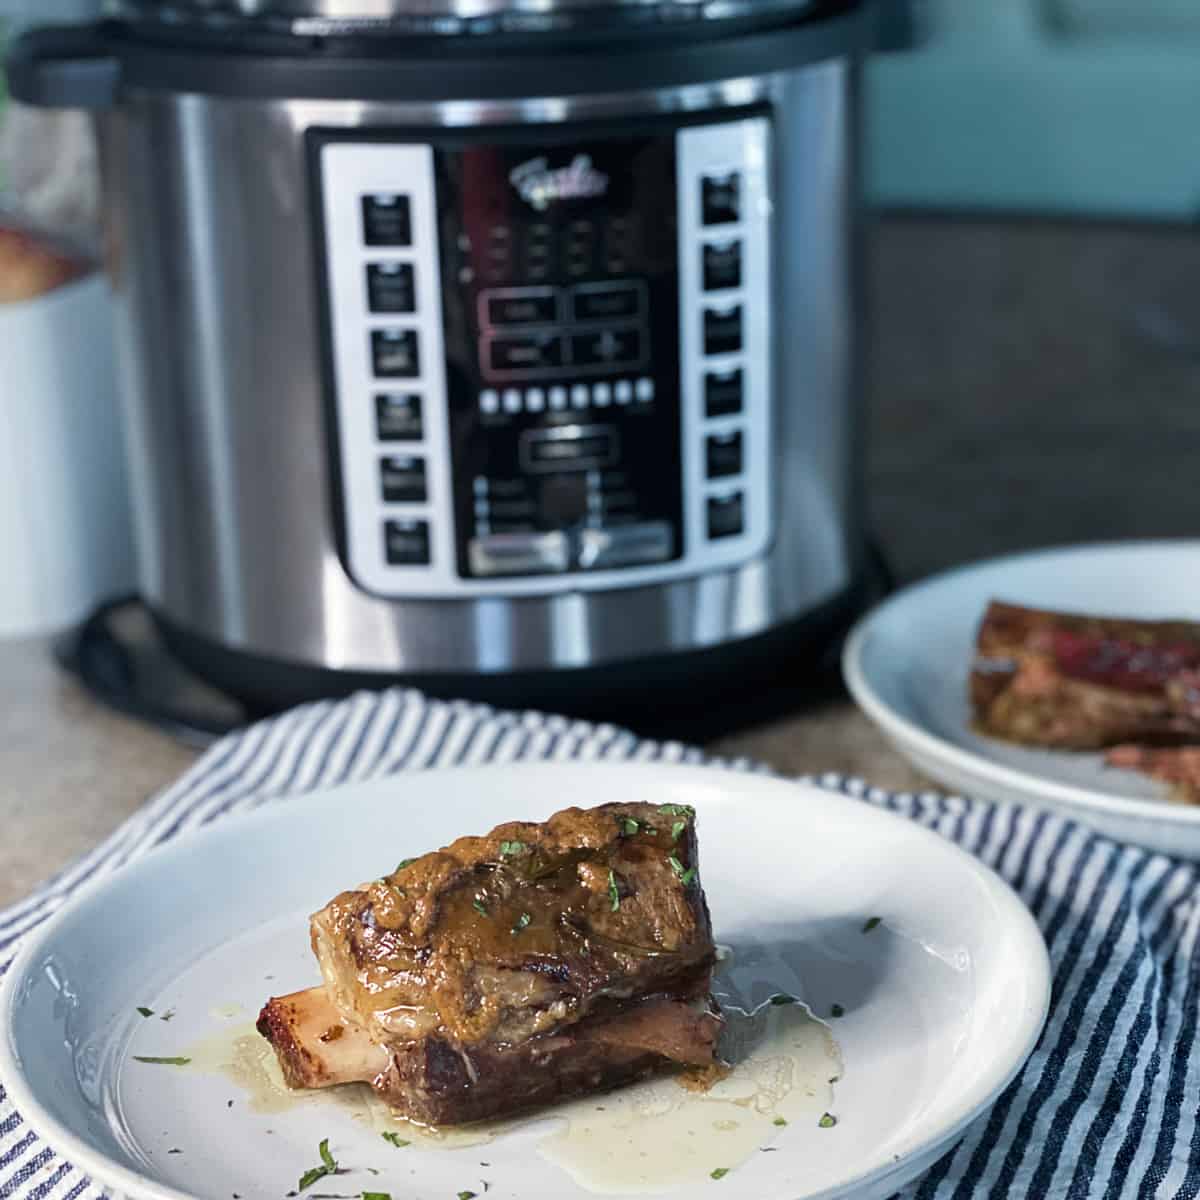 Fissler sous vide machine with beef short ribs sous vide style